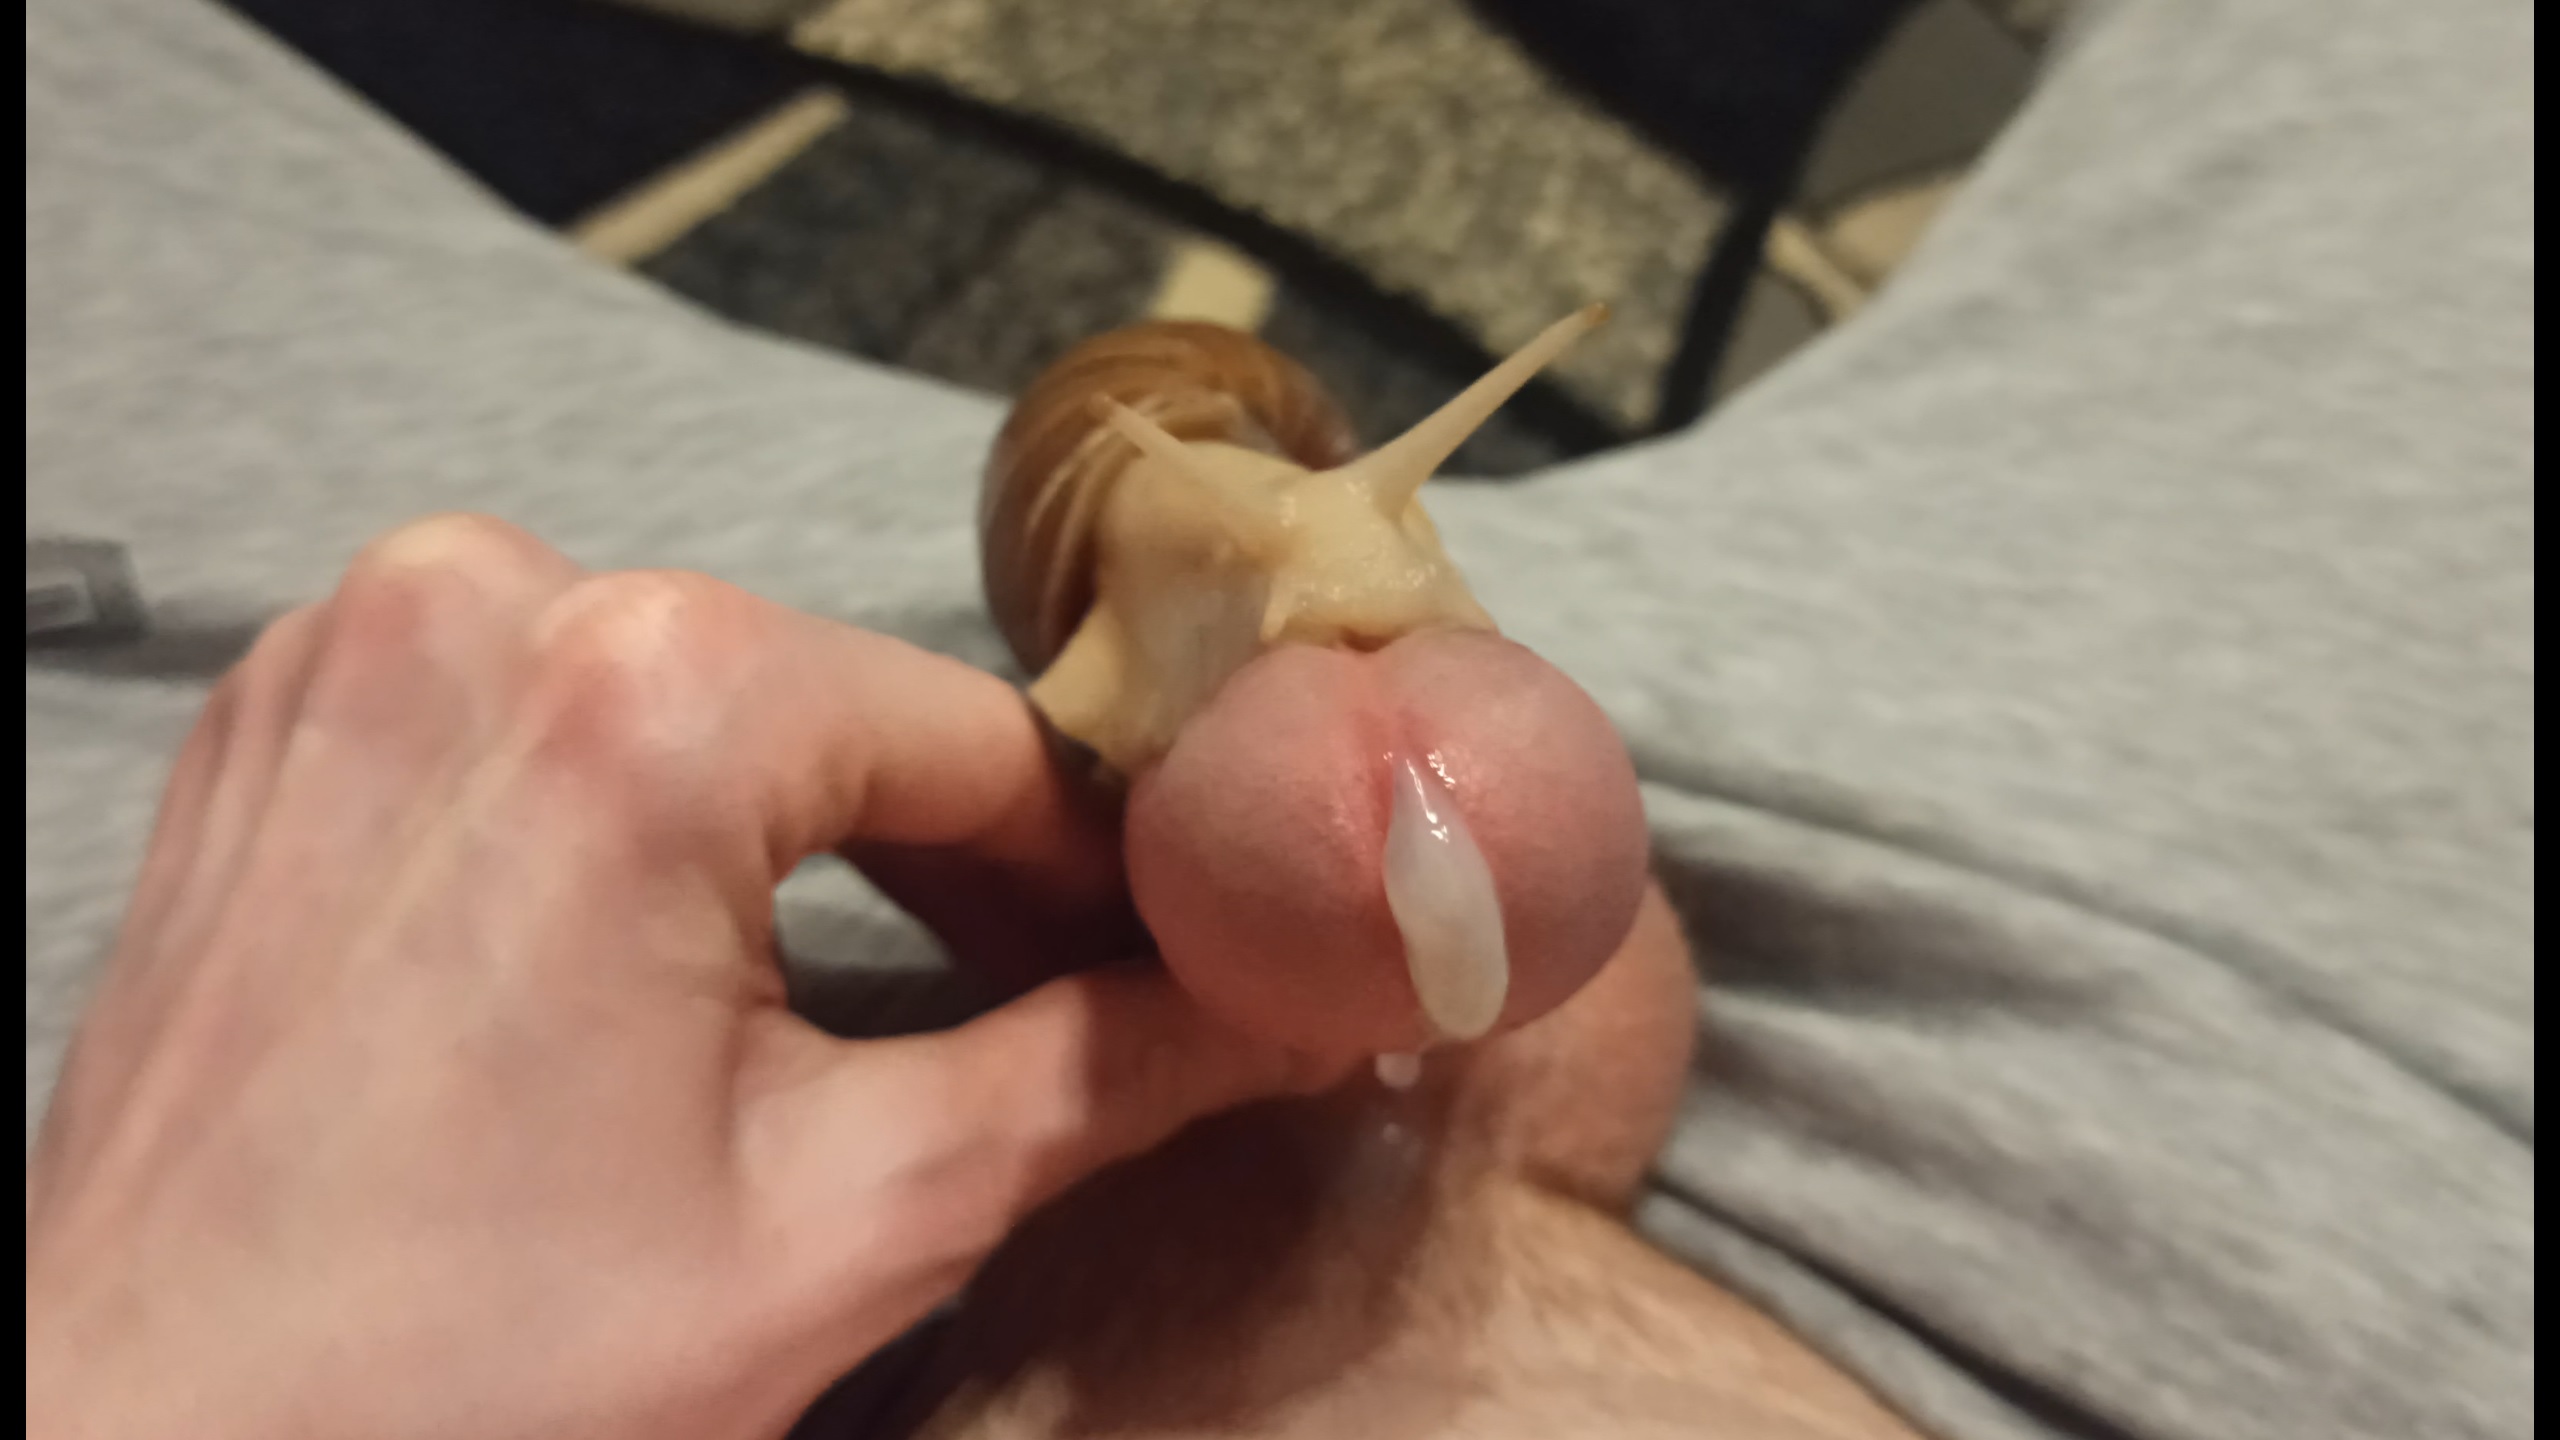 Giant snail on cock results in a pleasurable cumshot